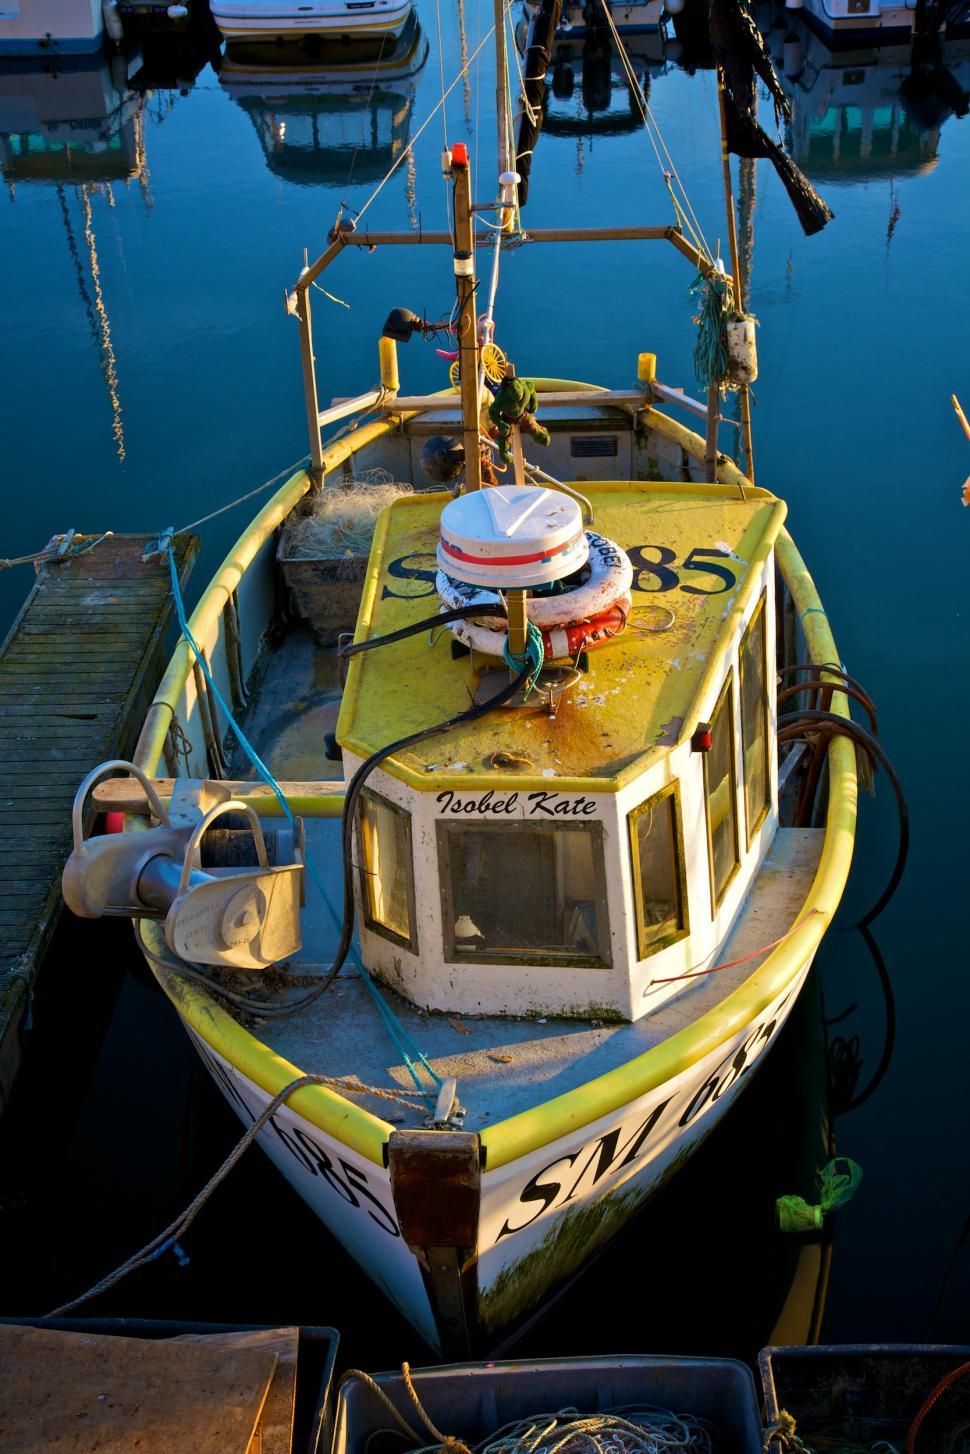 Free Image of Yellow and White Boat Docked at a Dock 